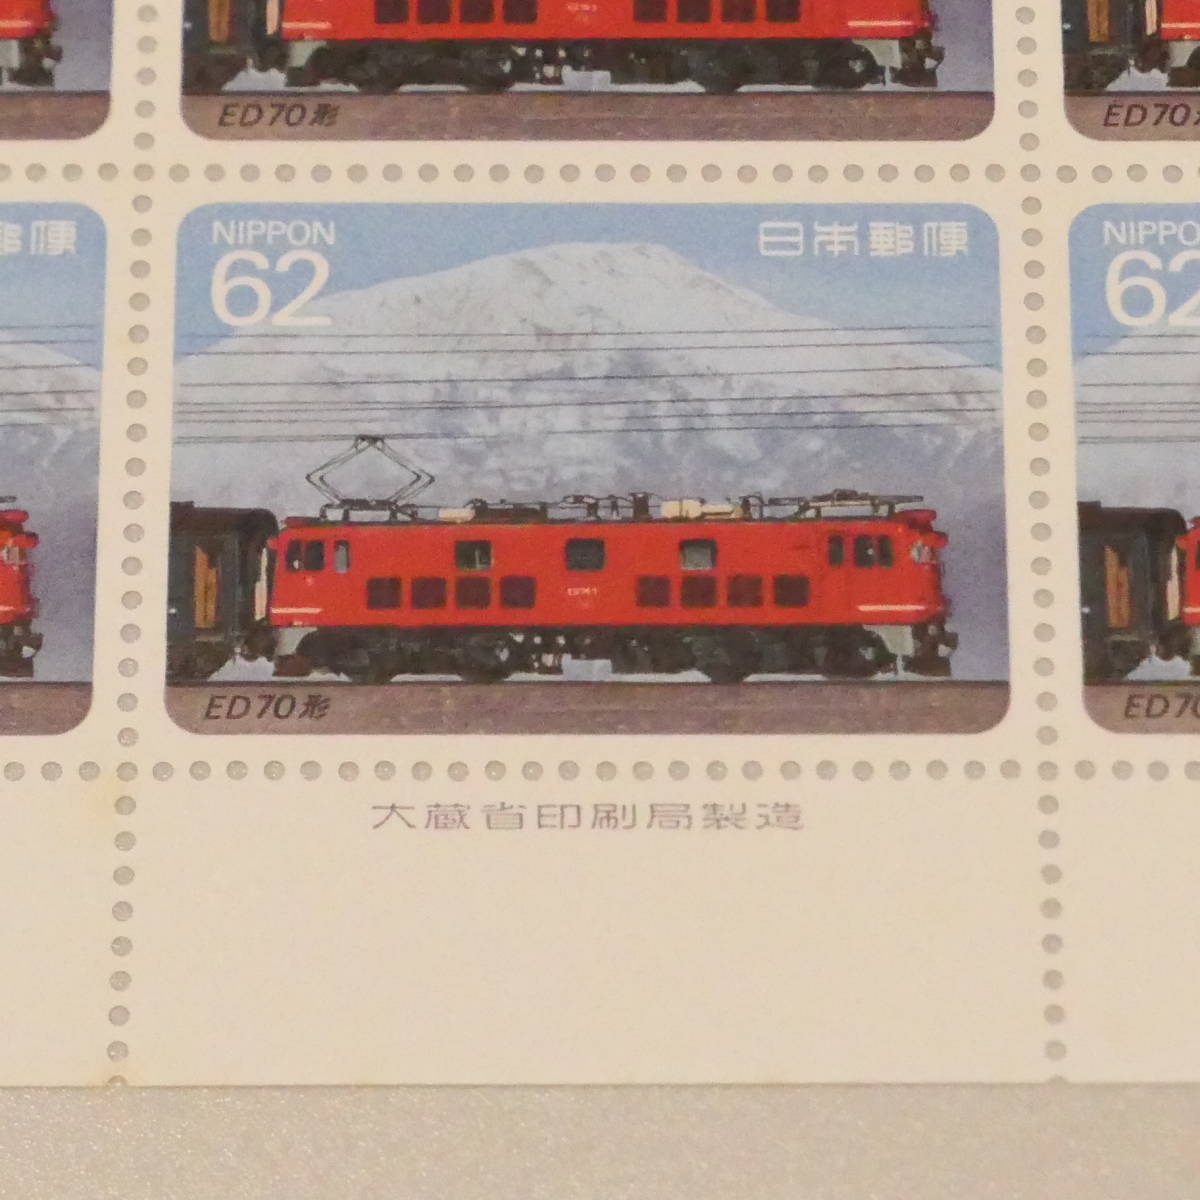  stamp 1990 year Heisei era 02 year 04 month 23 day electric locomotive series no. 3 compilation ED70 shape 62 jpy 20 sheets 1 seat 